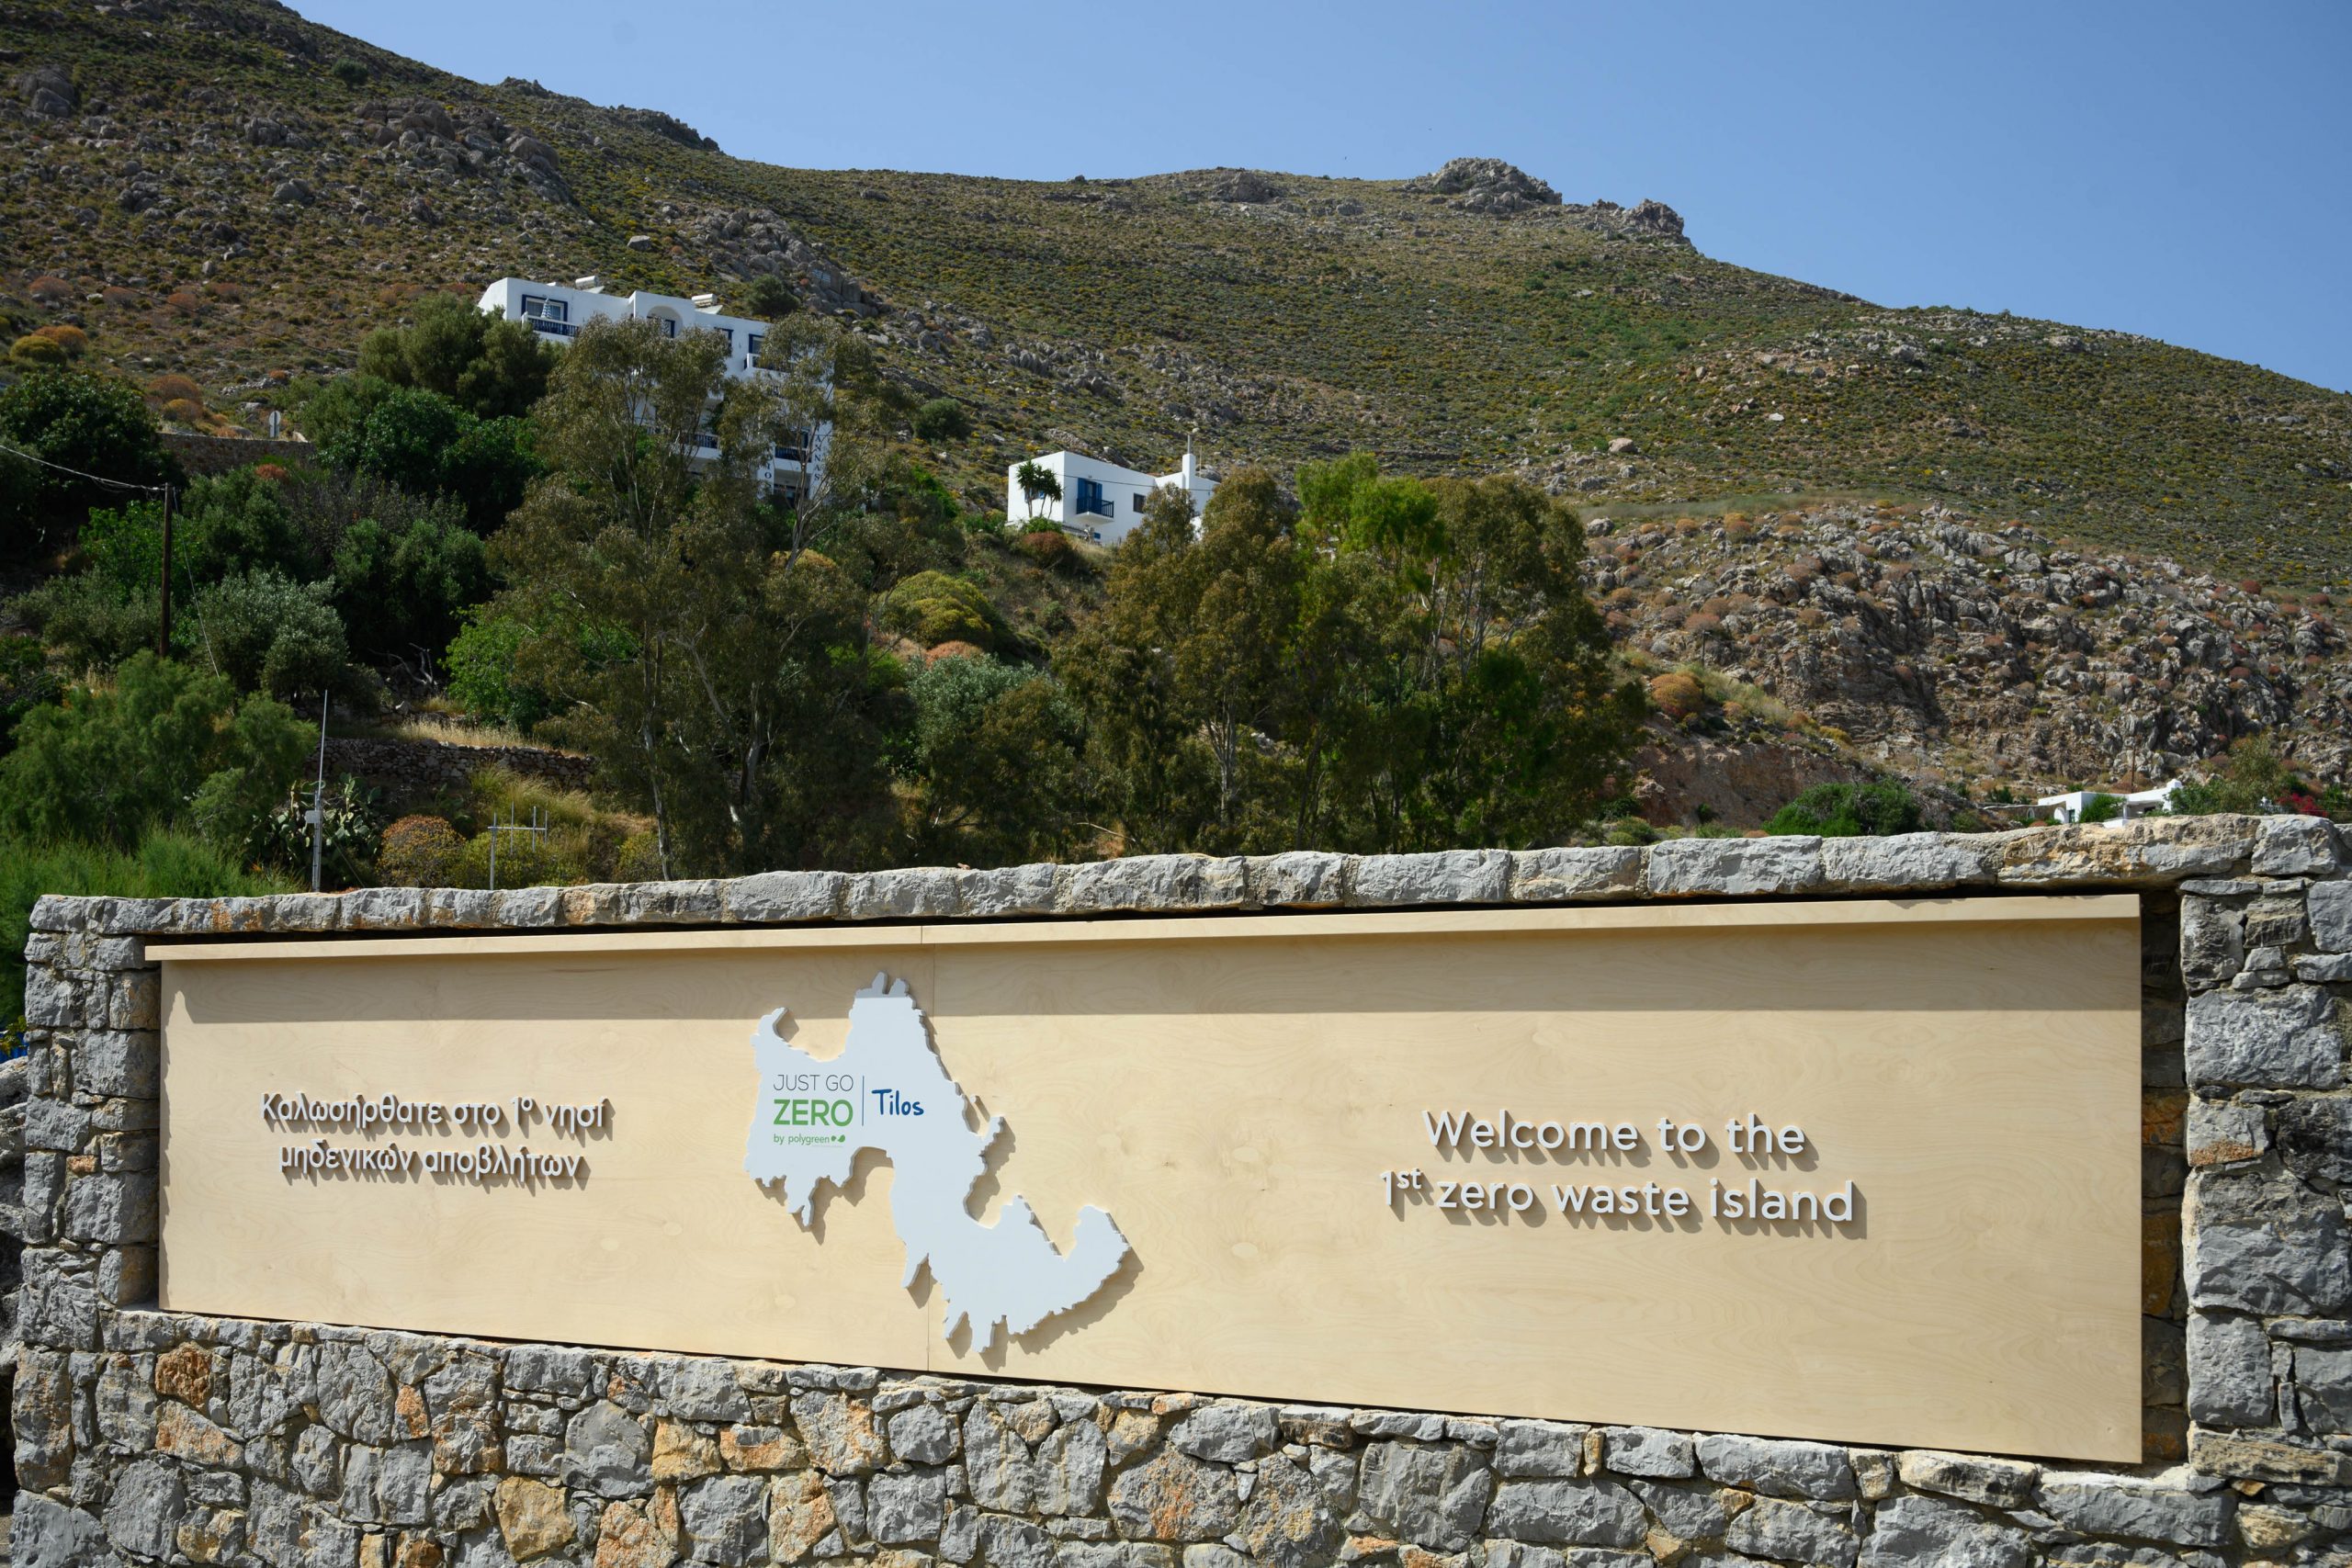 Tilos: Aiming for a place among Zero Waste Cities